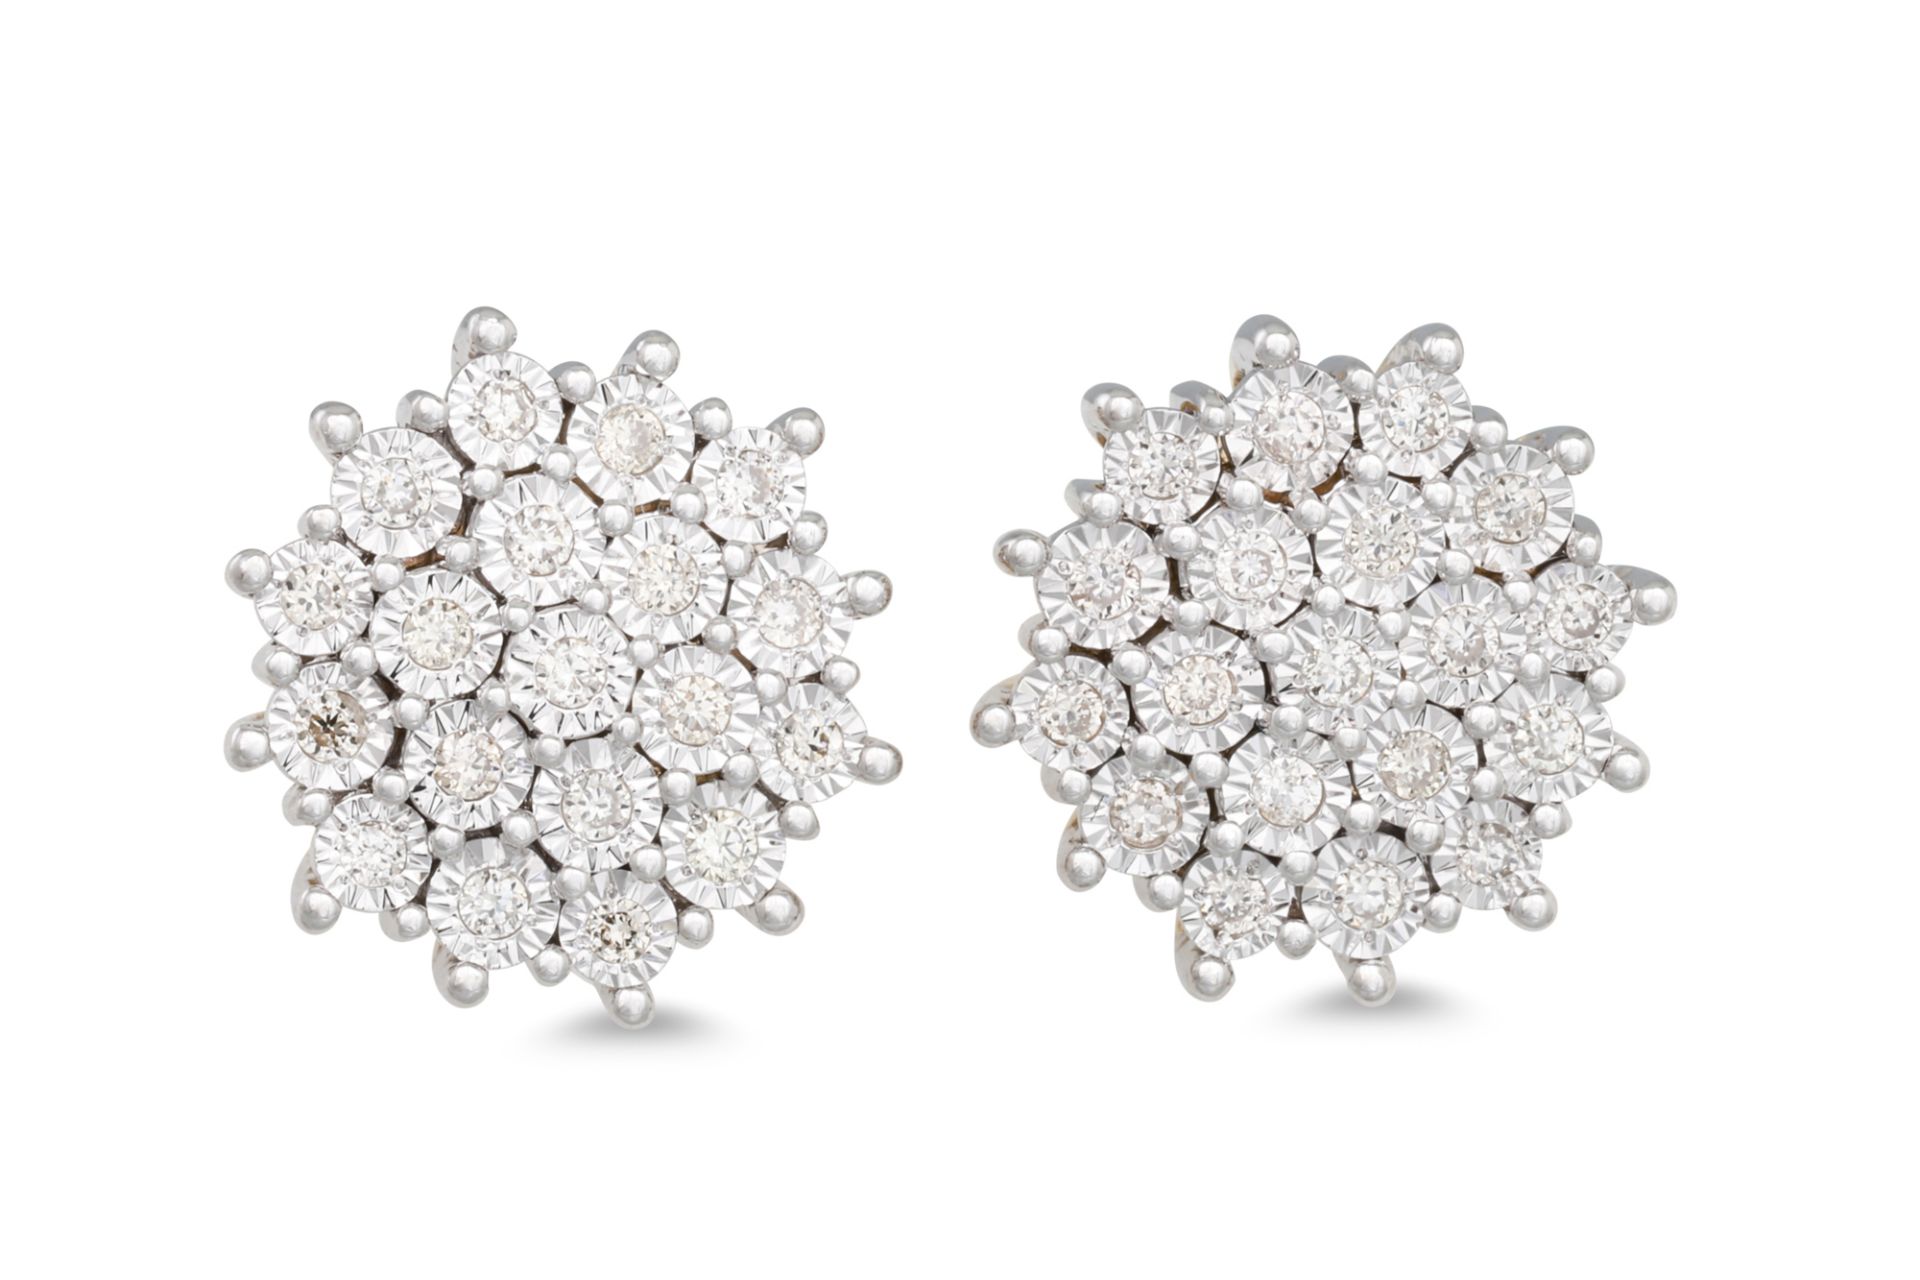 A PAIR OF DIAMOND CLUSTER EARRINGS, mounted in 9ct yellow gold